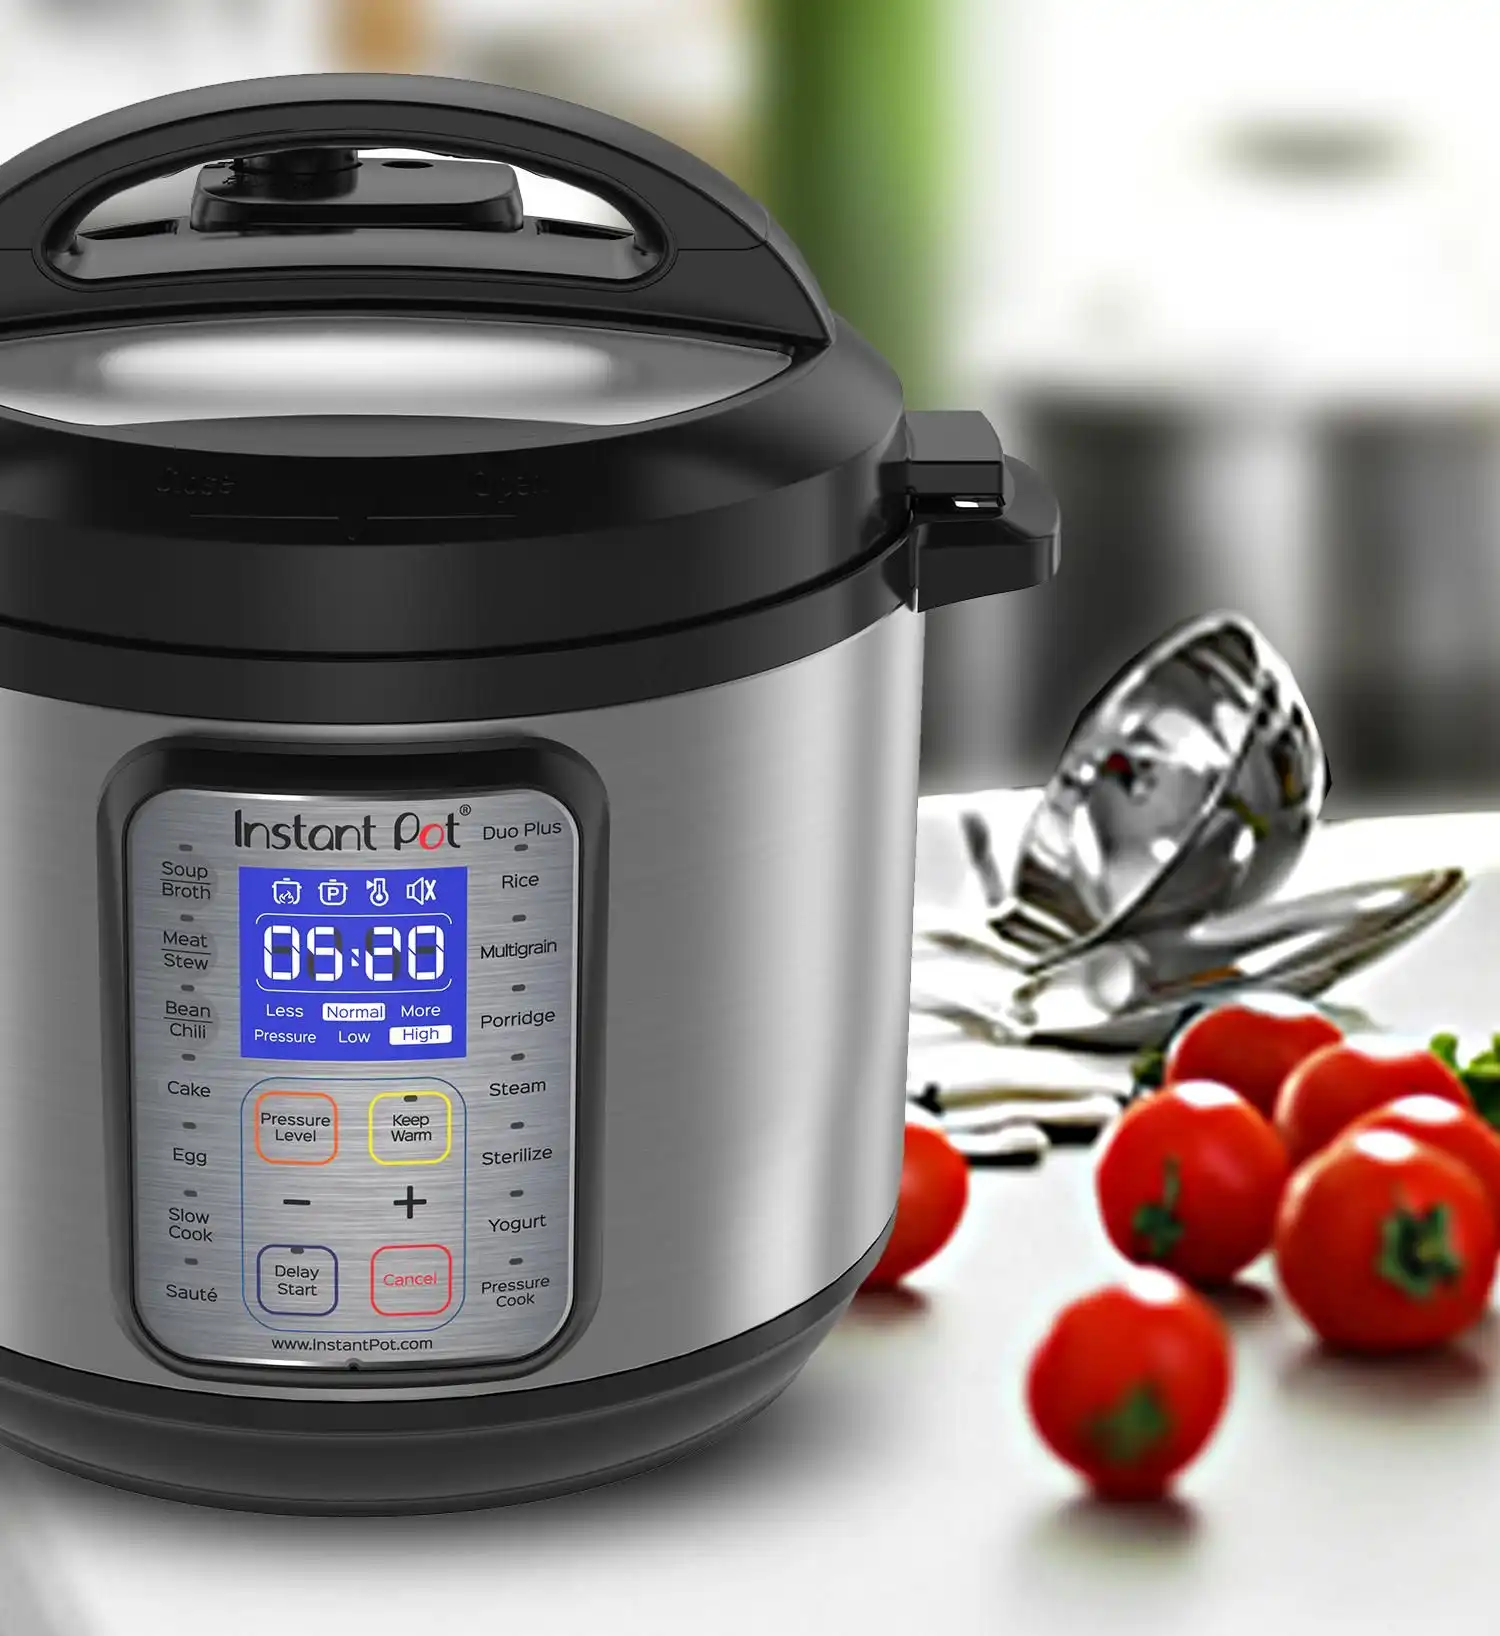 What Can I Make In An Instant Pot